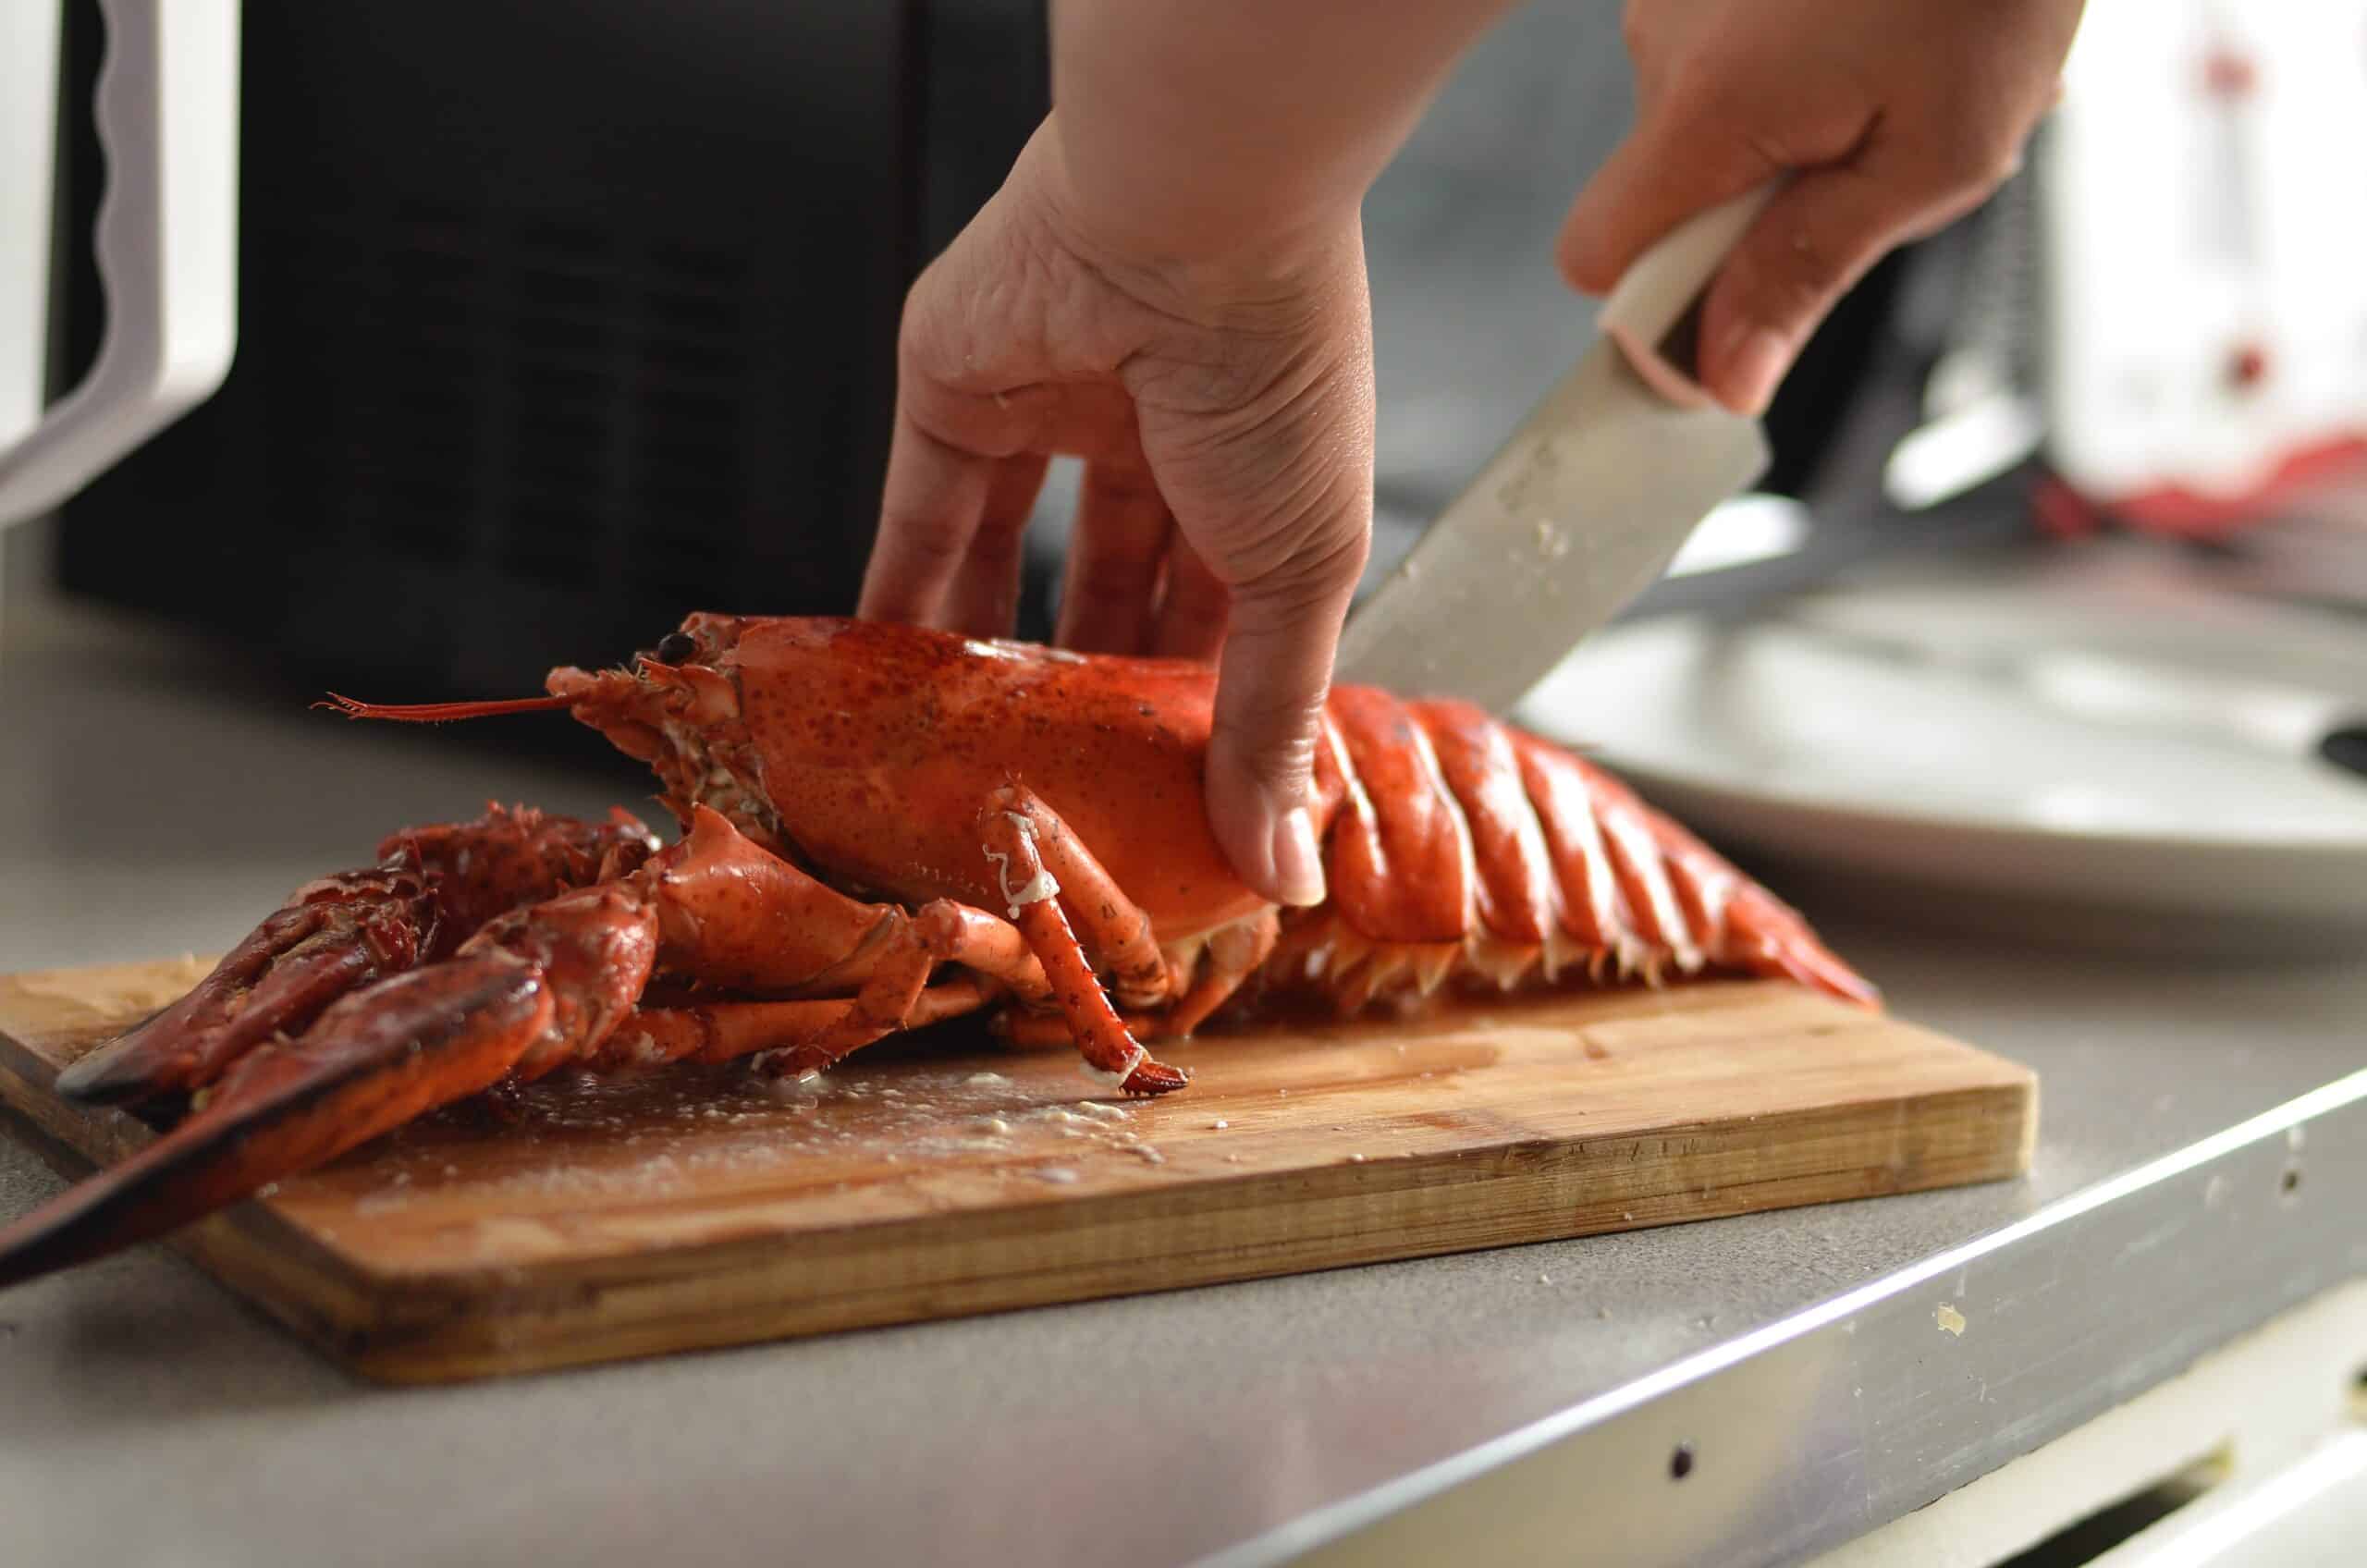 A lobster being cut